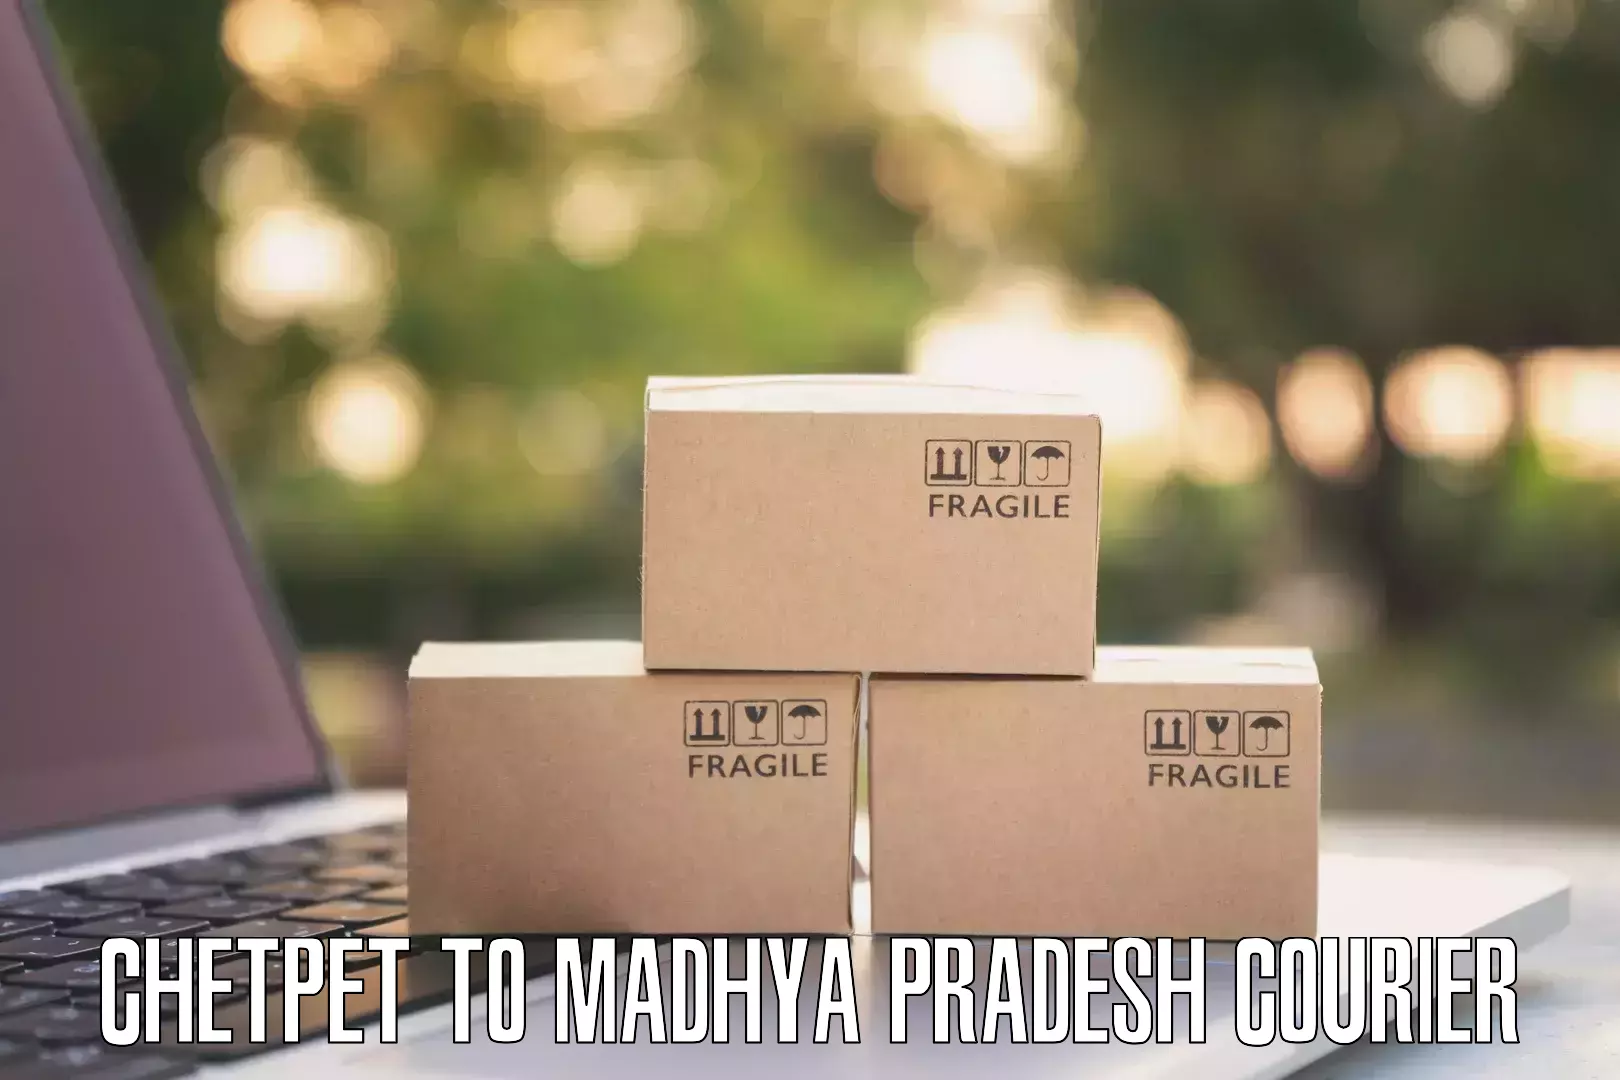 Reliable courier service Chetpet to Dola